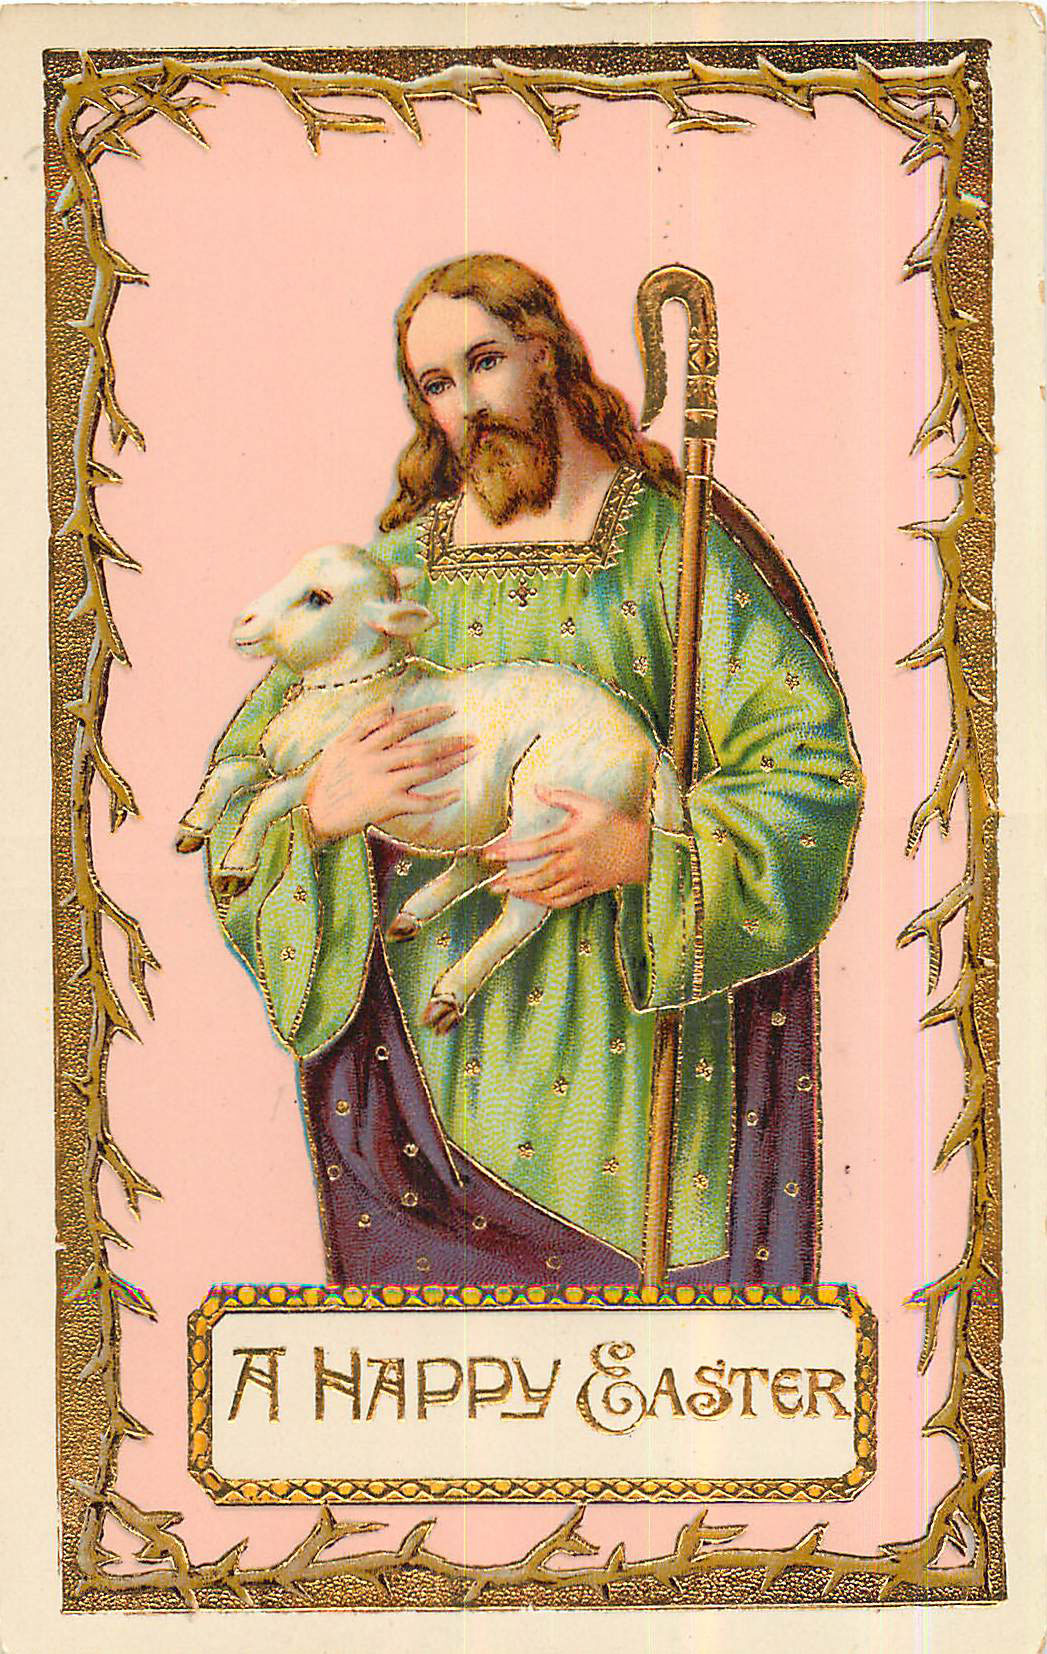 A Happy Easter - Holding a lamb and staff